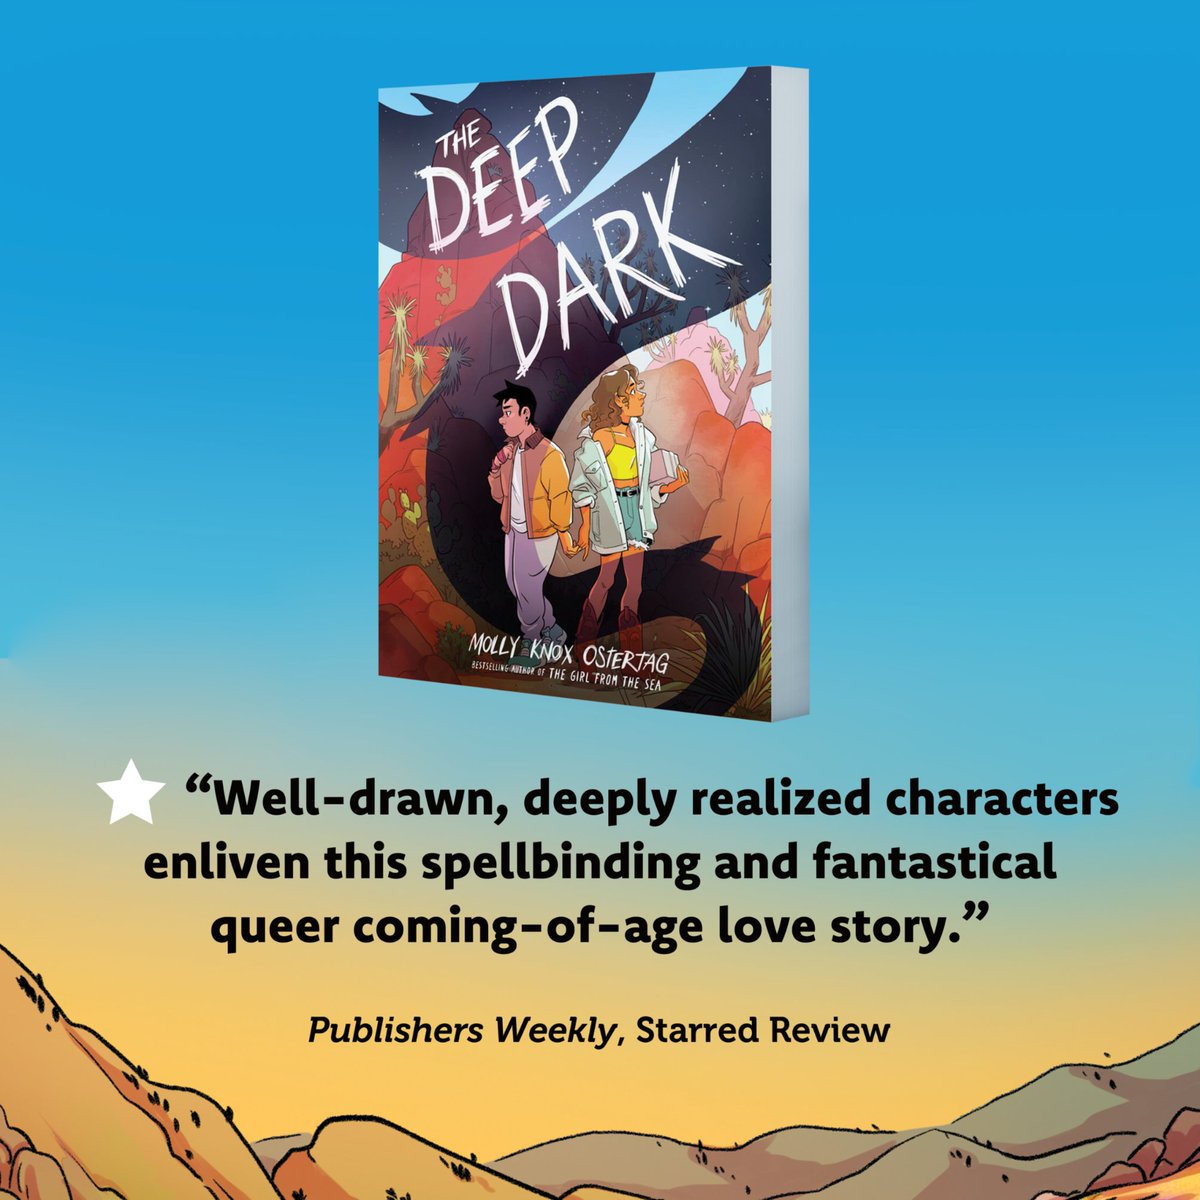 YA readers, sink your teeth into a darkly beautiful story of identity, family, love, loss, and magic when you pre-order The Deep Dark by @MollyOstertag, out 6/4.